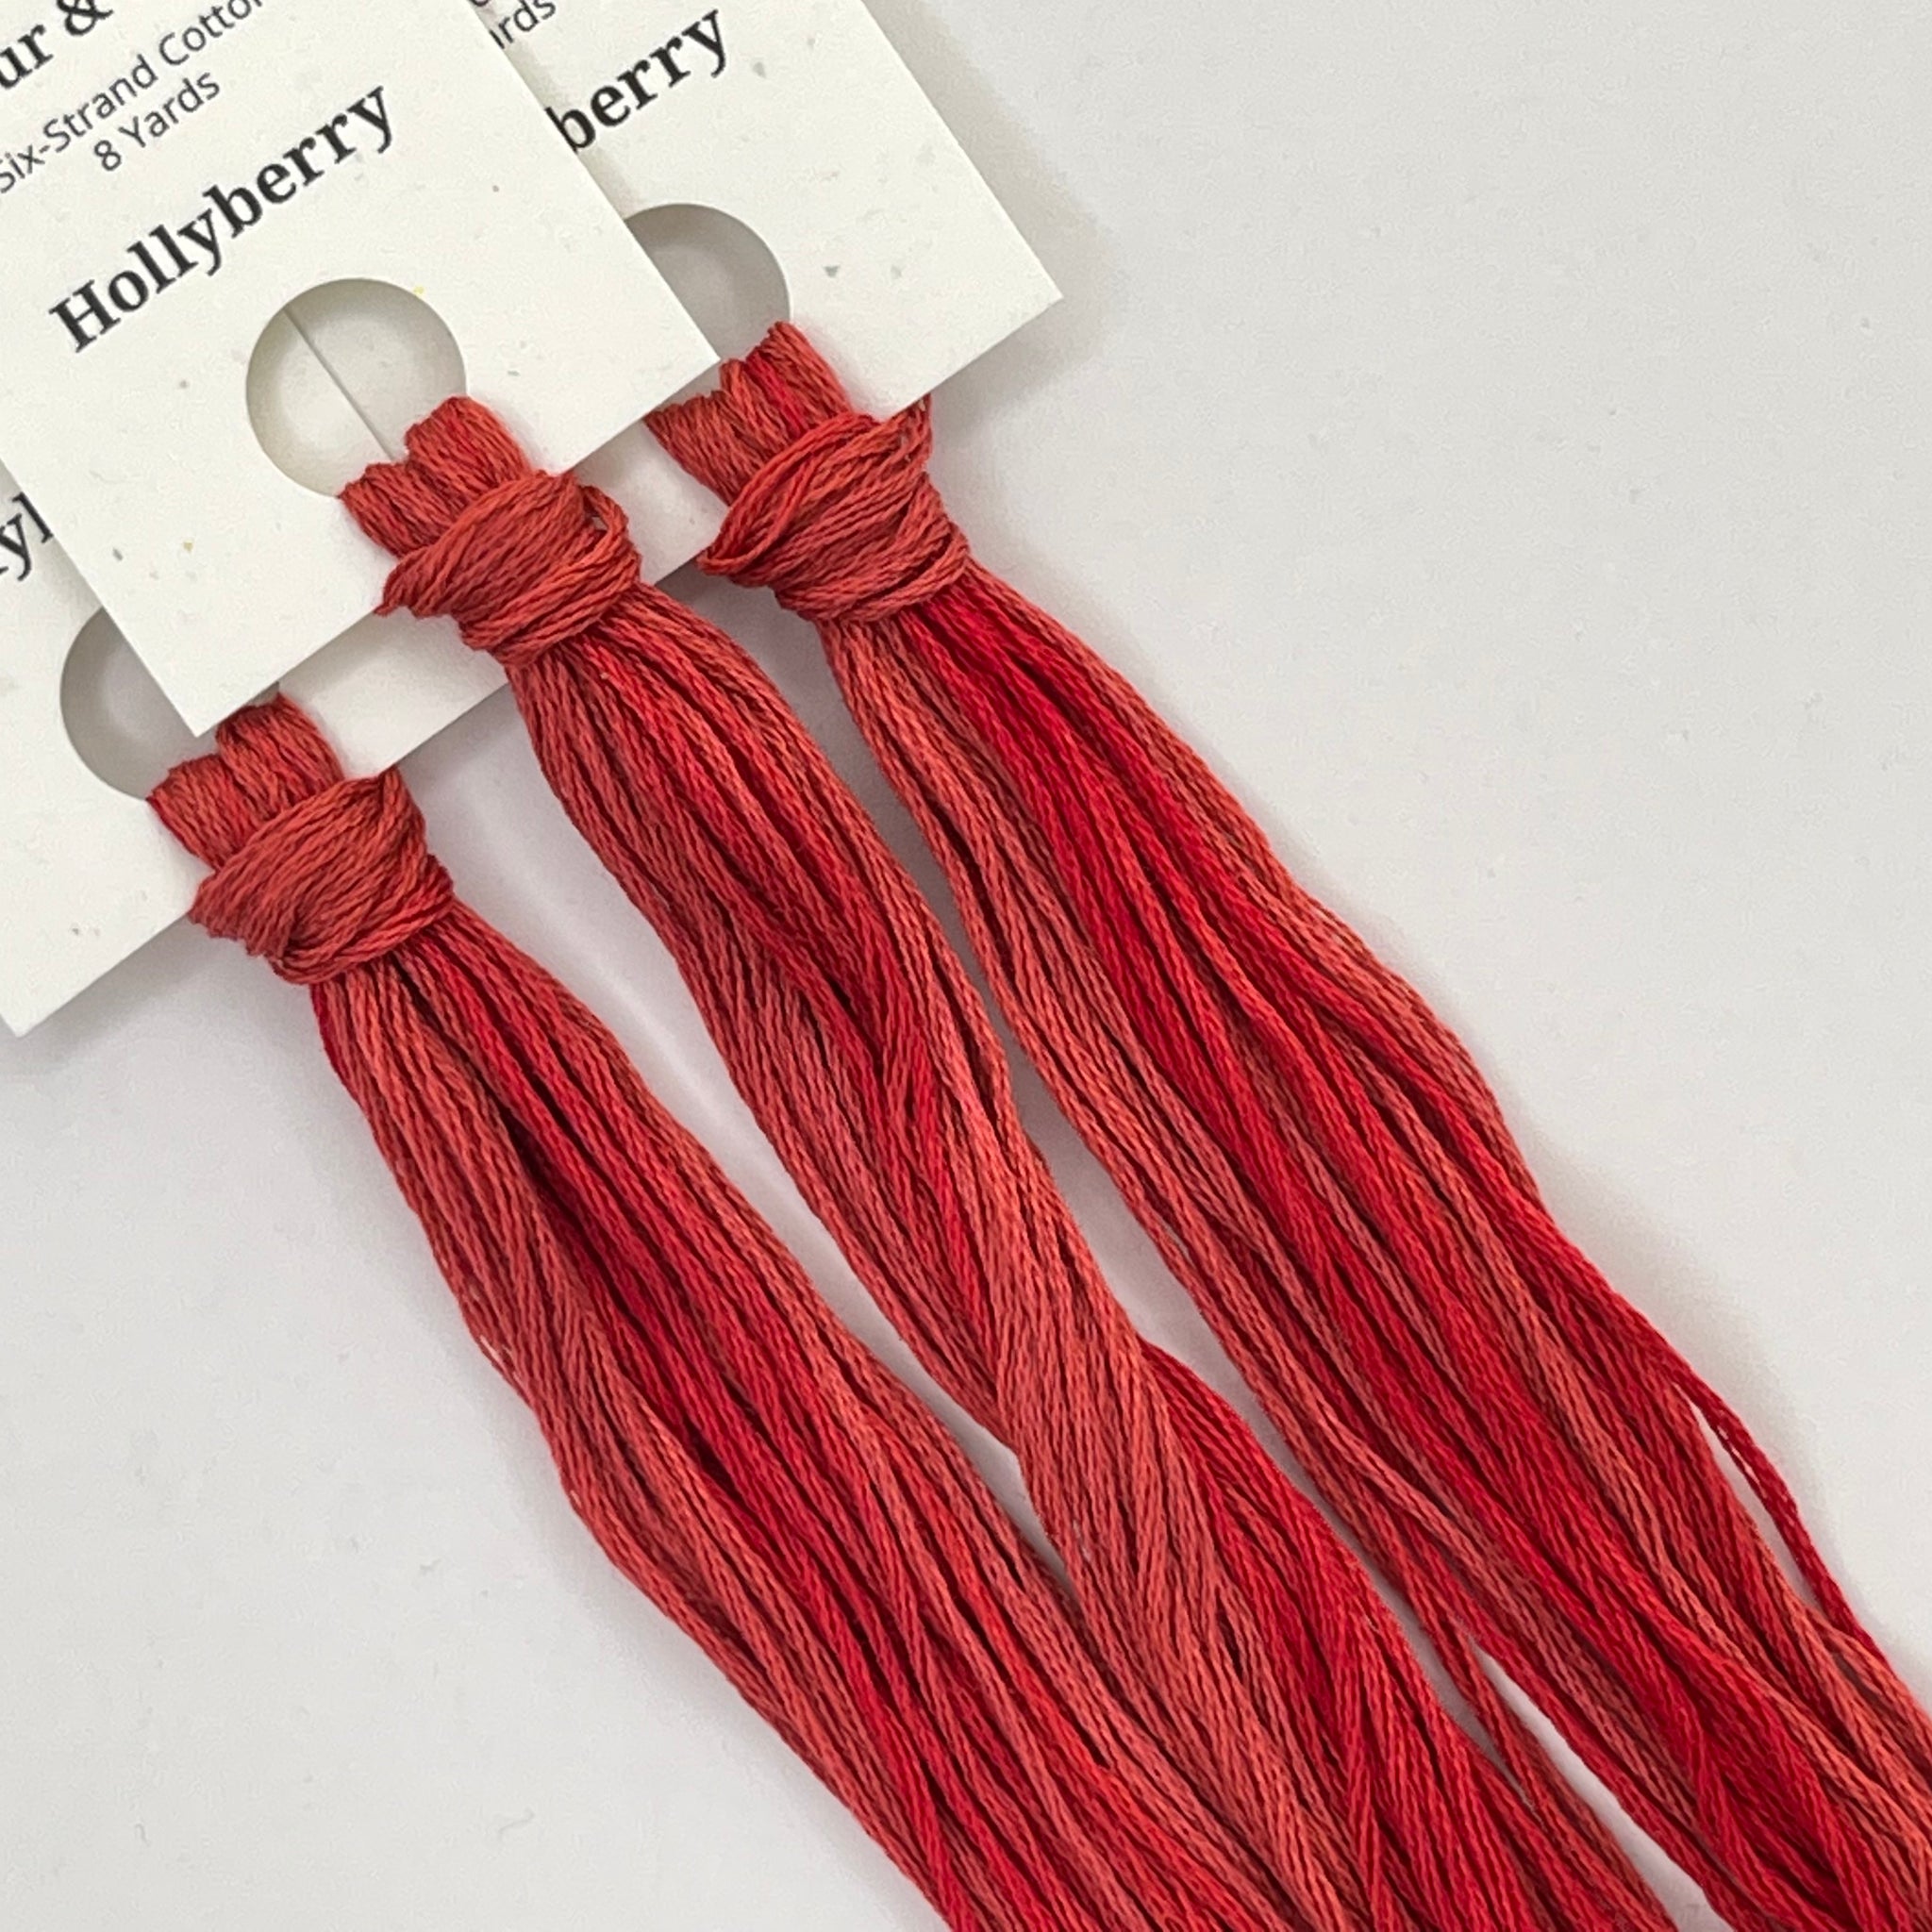 Colour and Cotton Hand Dyed Thread - Hollyberry